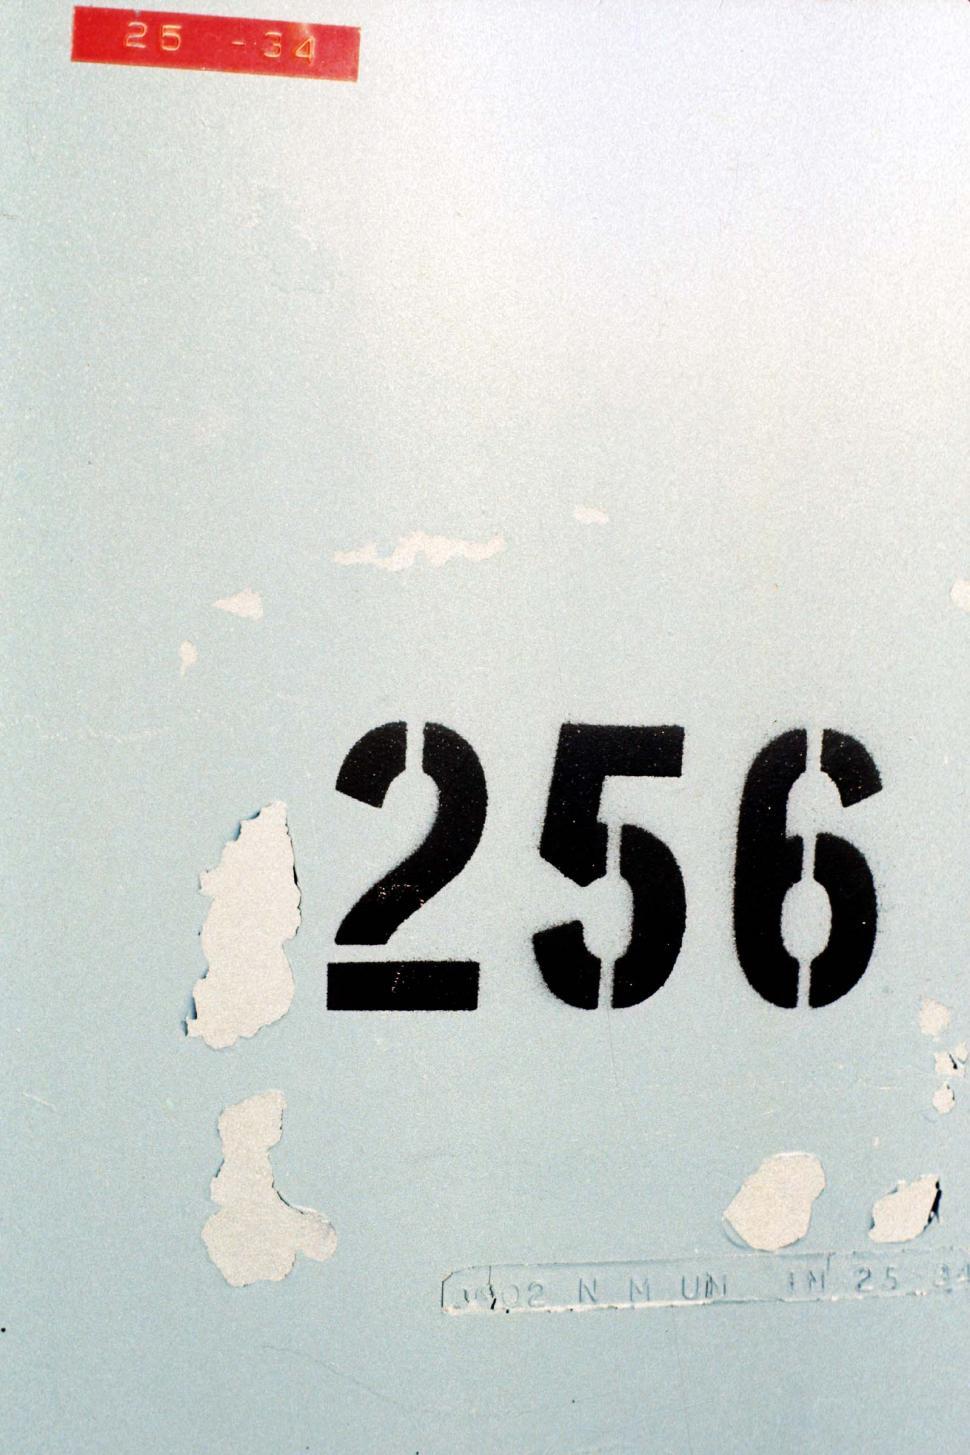 Free Image of numbers apartment address labels 256 peeling stenciled weathered metal painted labelled mailbox 